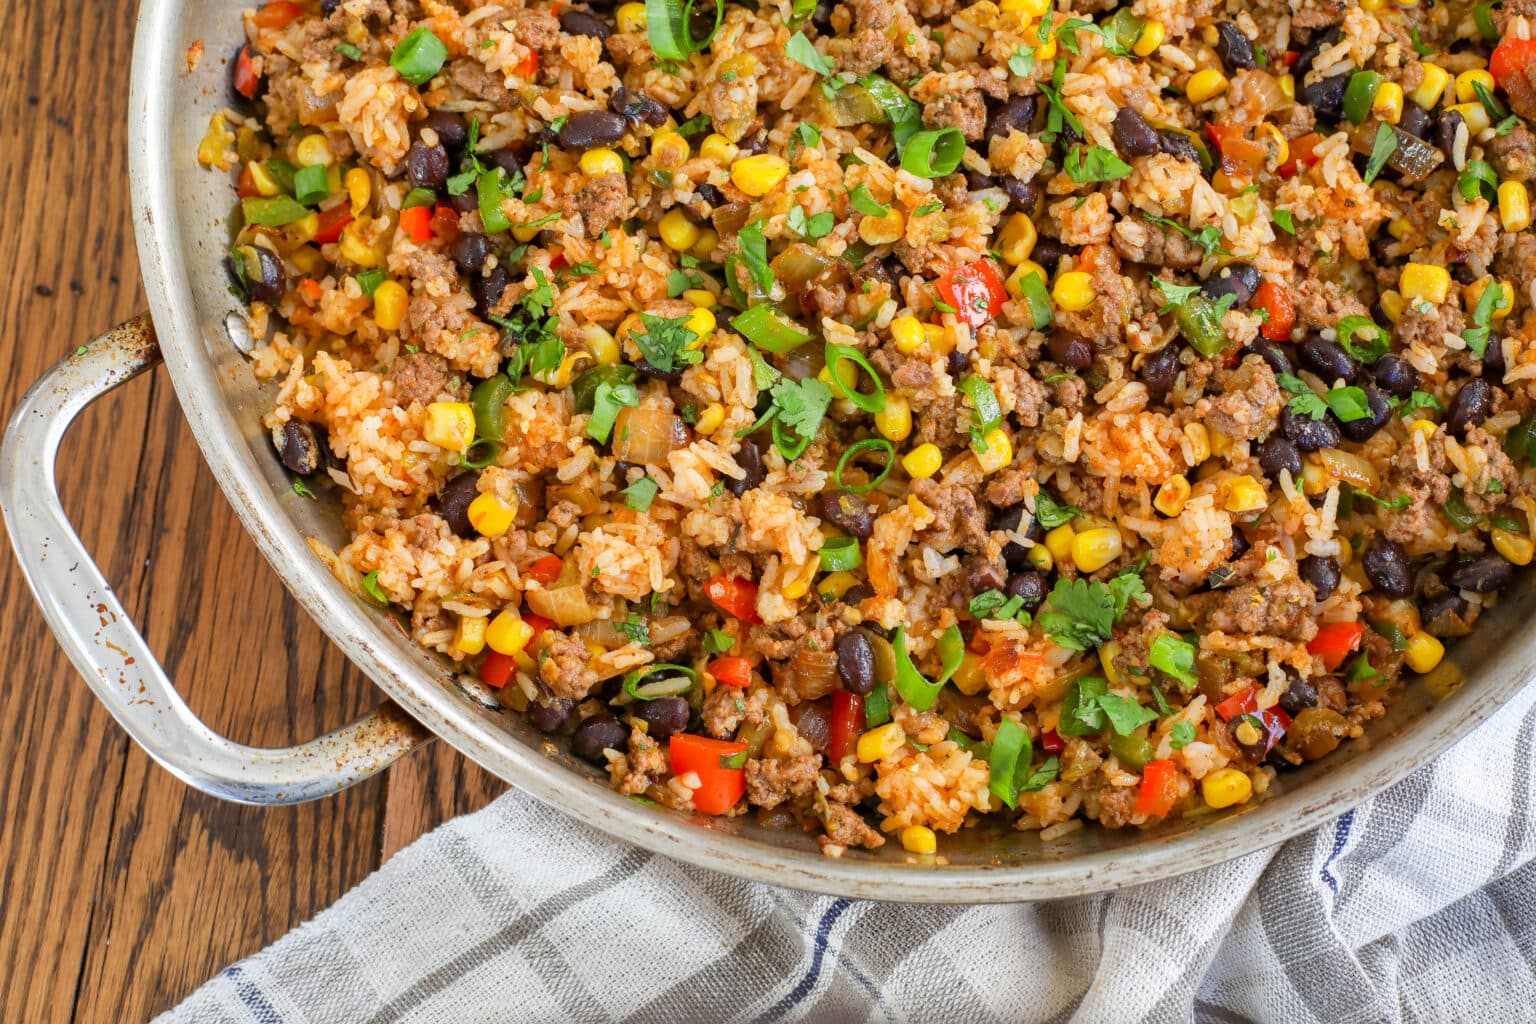 Mexican Fried Rice 7 1 Of 1 1536x1024 